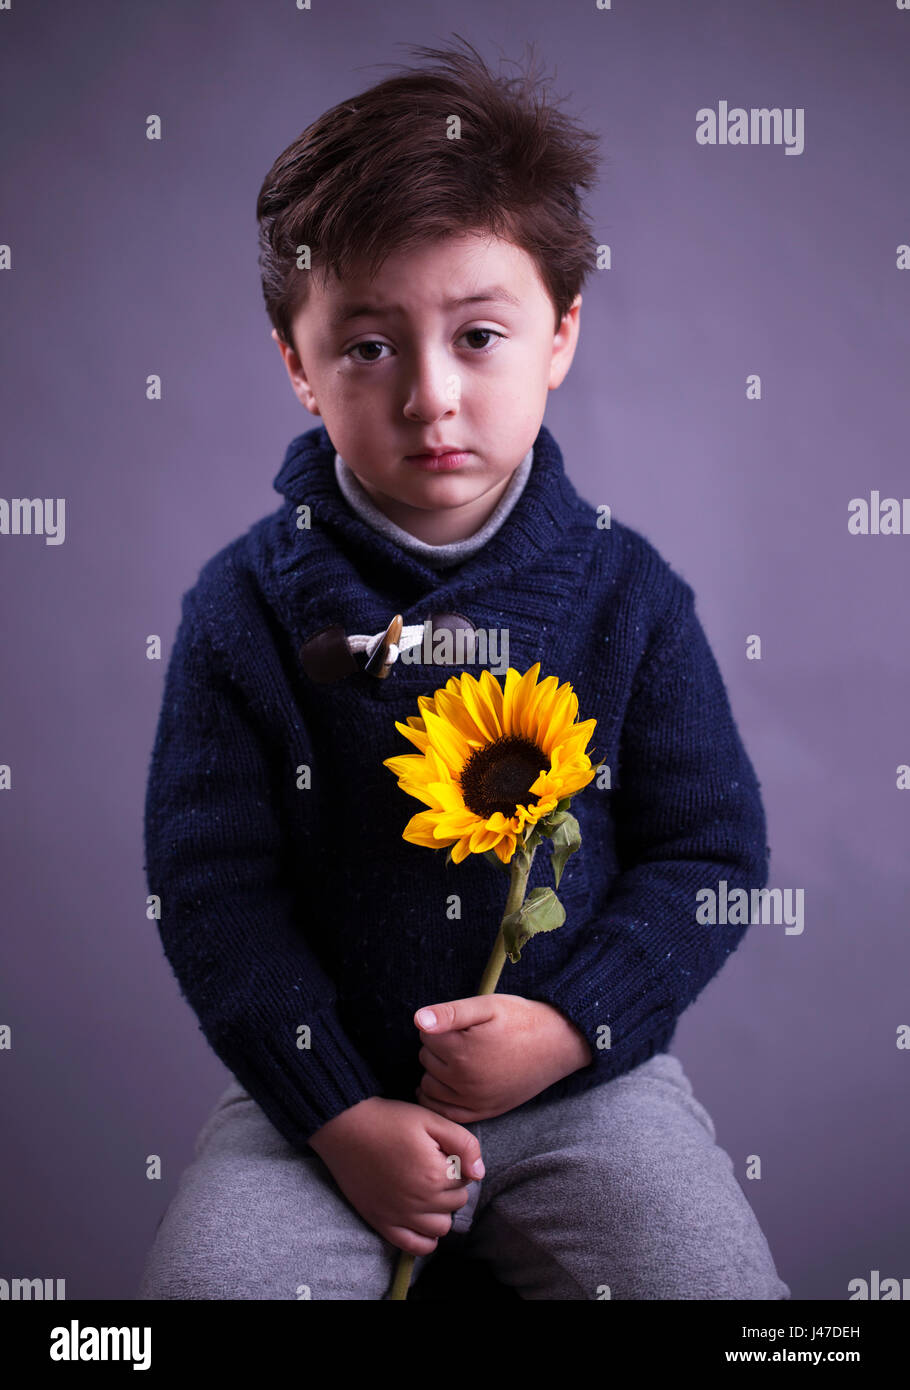 serious looking mixed race Asian Caucasian little boy with brown hair wearing a knitted blue sweater holding a large yellow sunflower Stock Photo